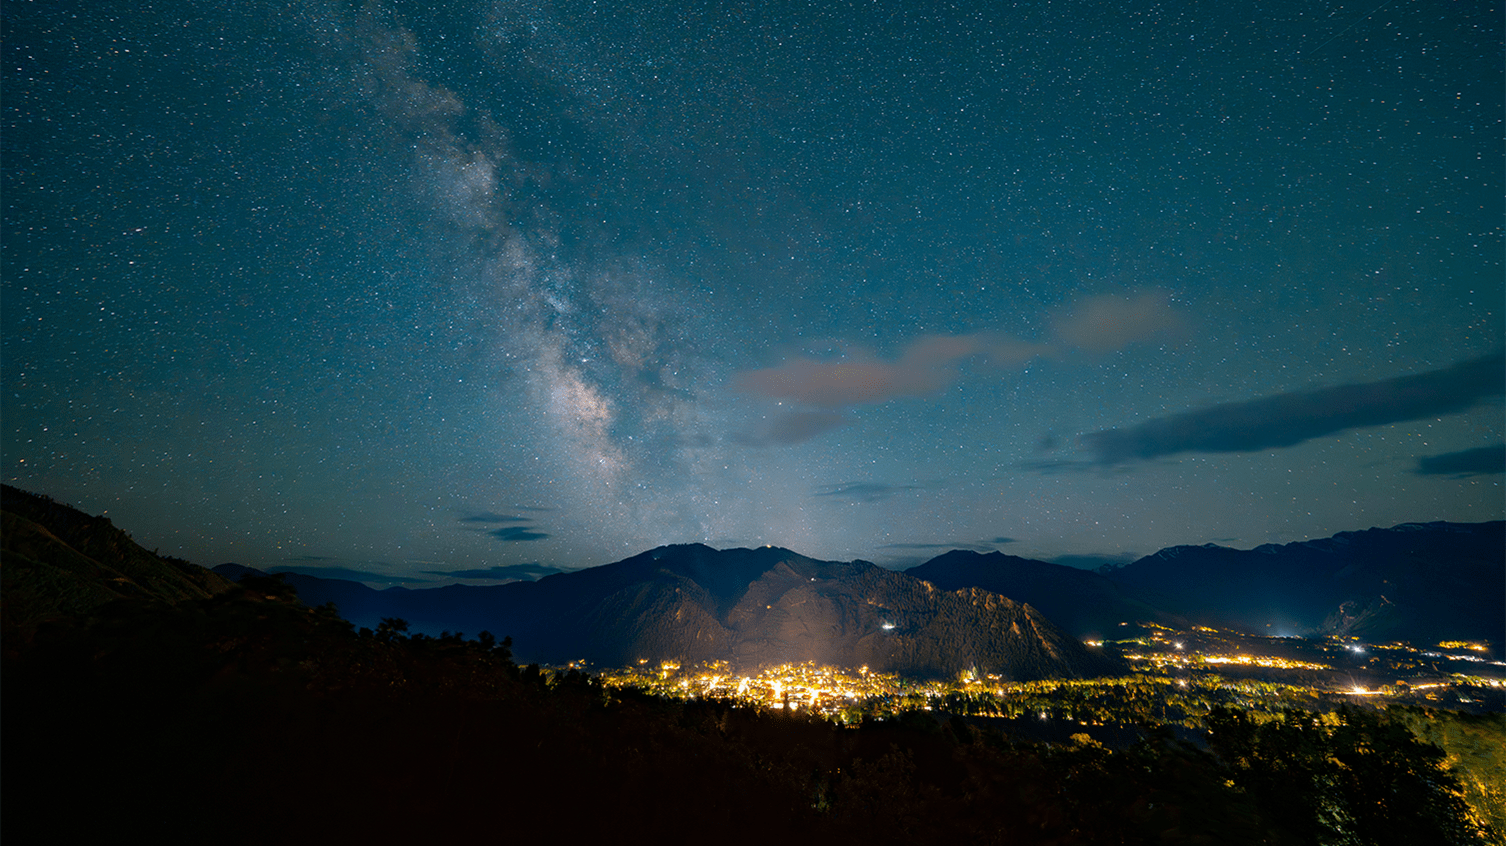 The town of Aspen in the summer, at night. The town is glowing and the milky way is glowing above